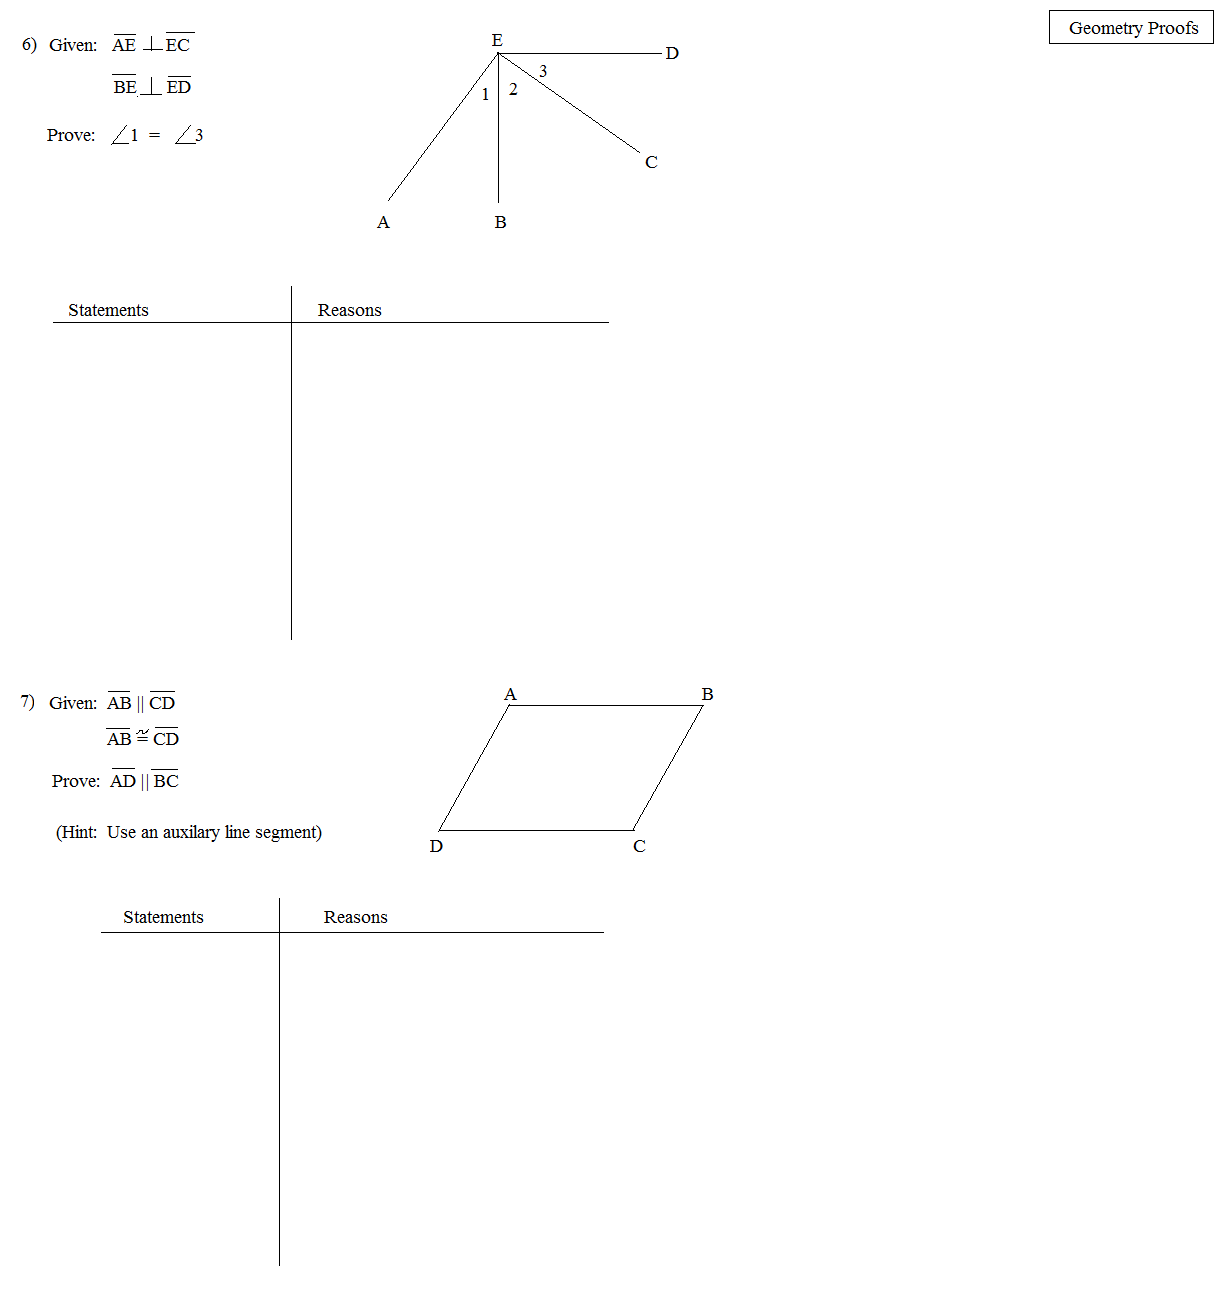 11-best-images-of-overlapping-triangle-proofs-worksheets-geometry-triangle-proofs-worksheet